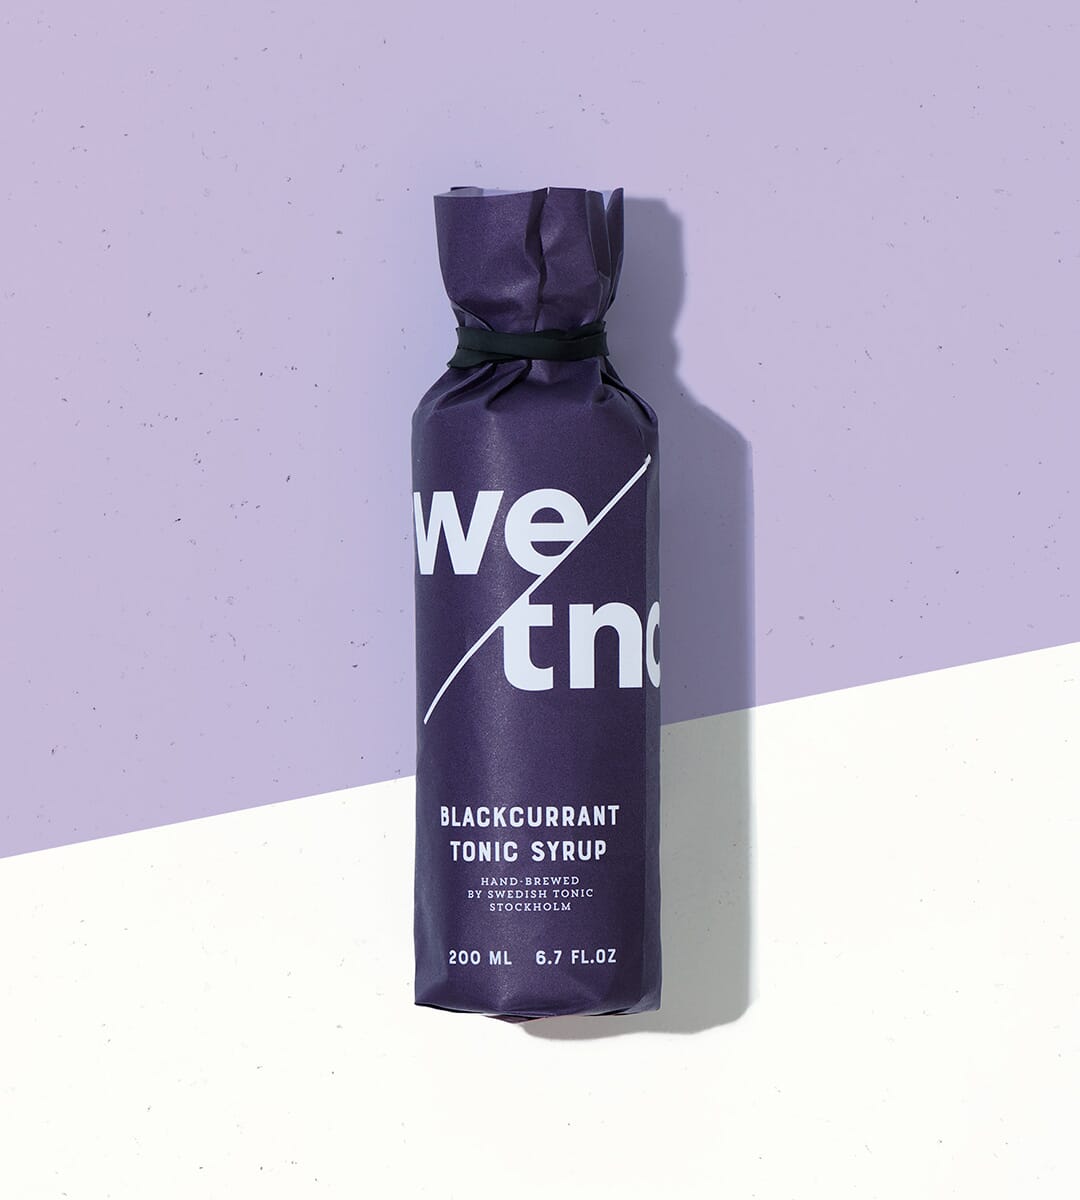 Swedish Tonic Blackcurrant with blackcurrant flavour